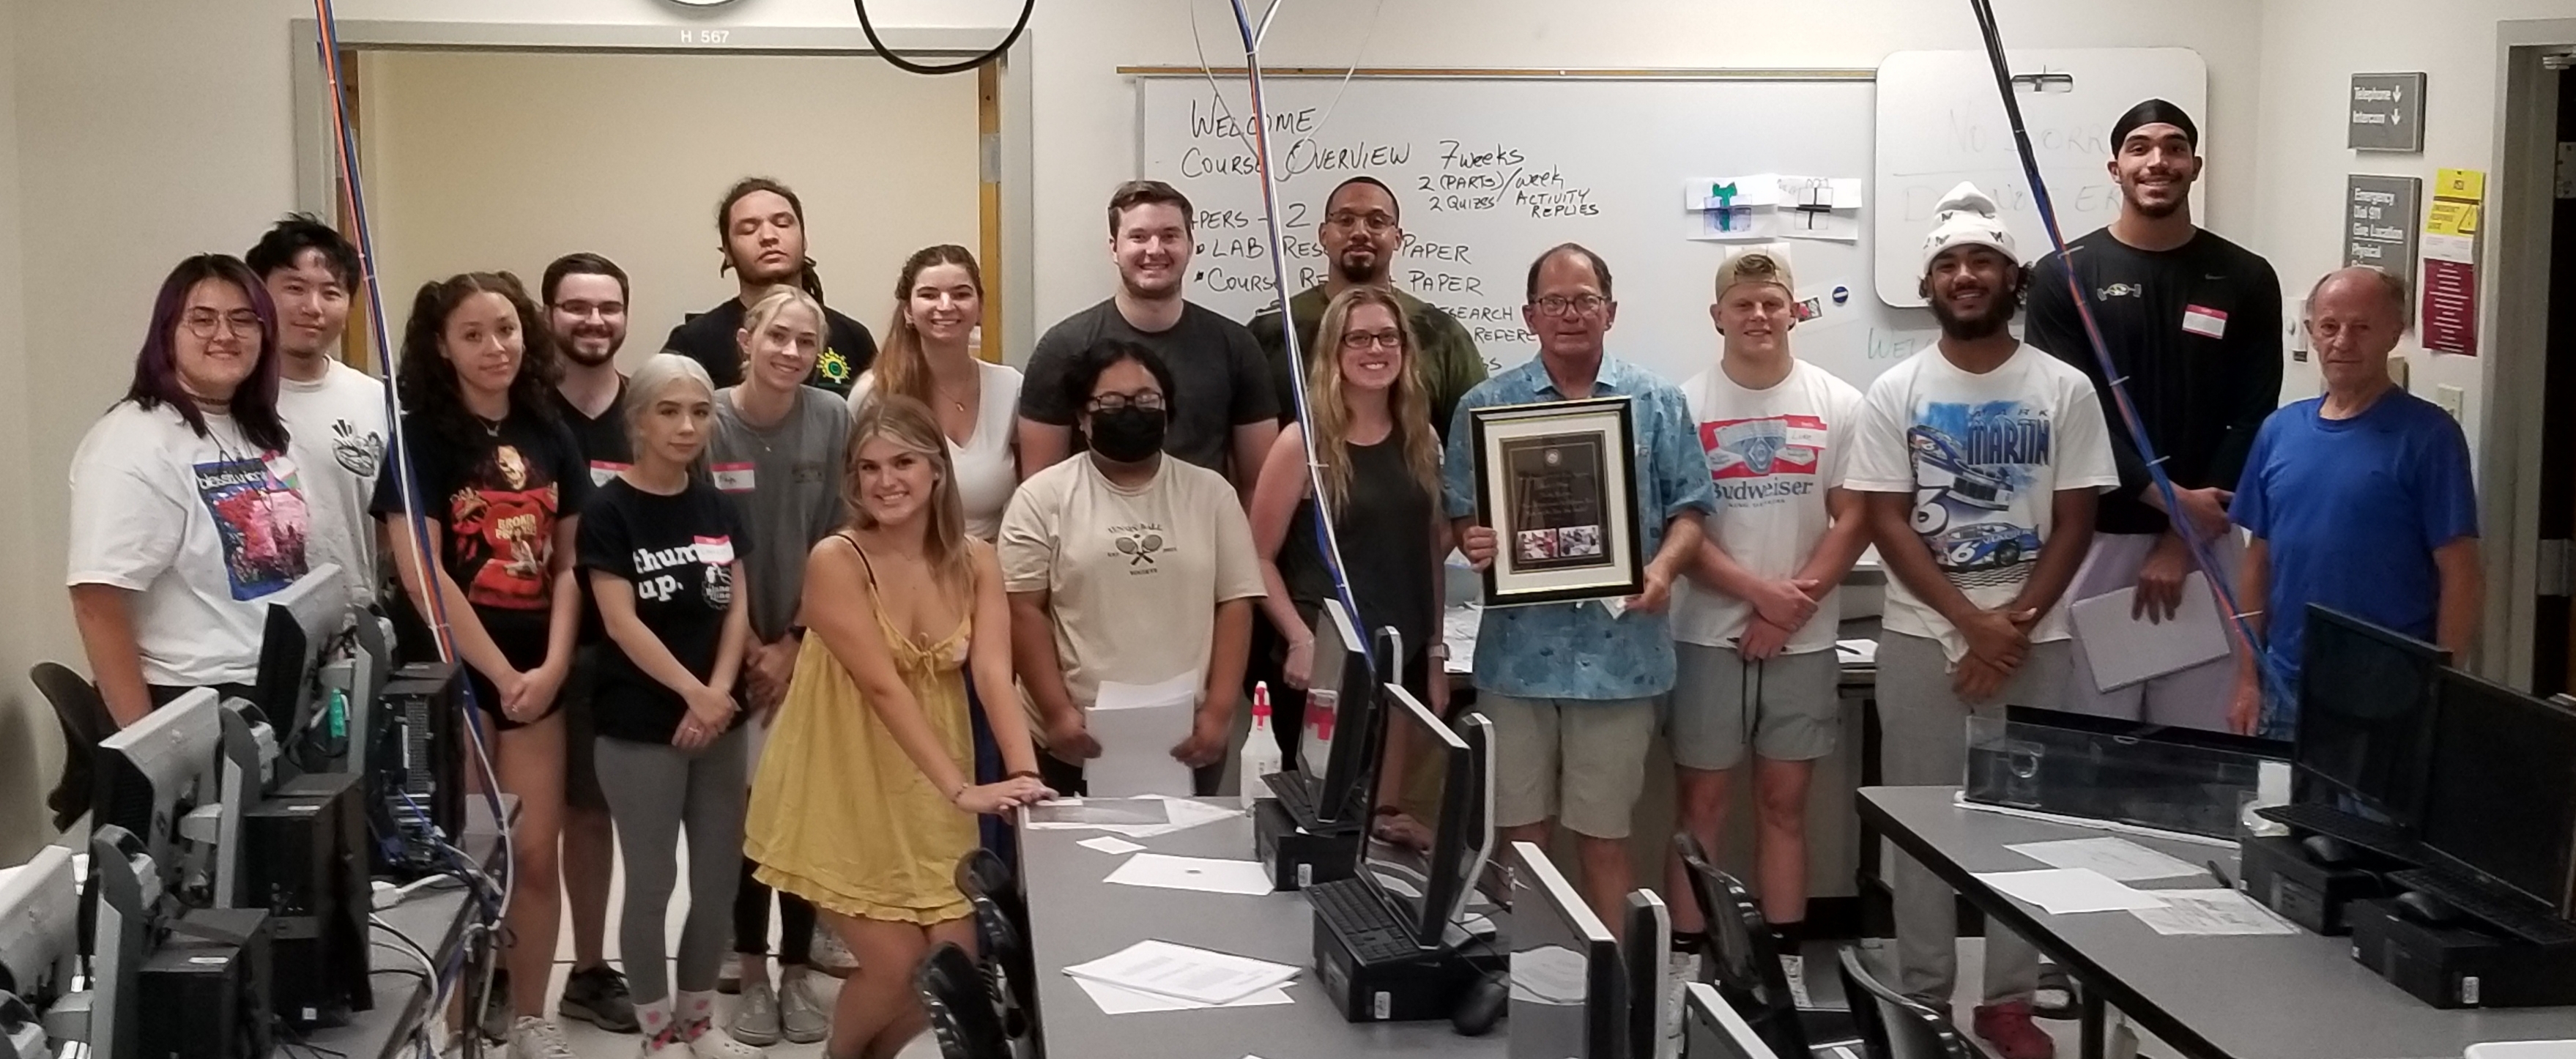 Professor Frank Mayer's last day at the Patterns and Nature lab in the spring of 2022.